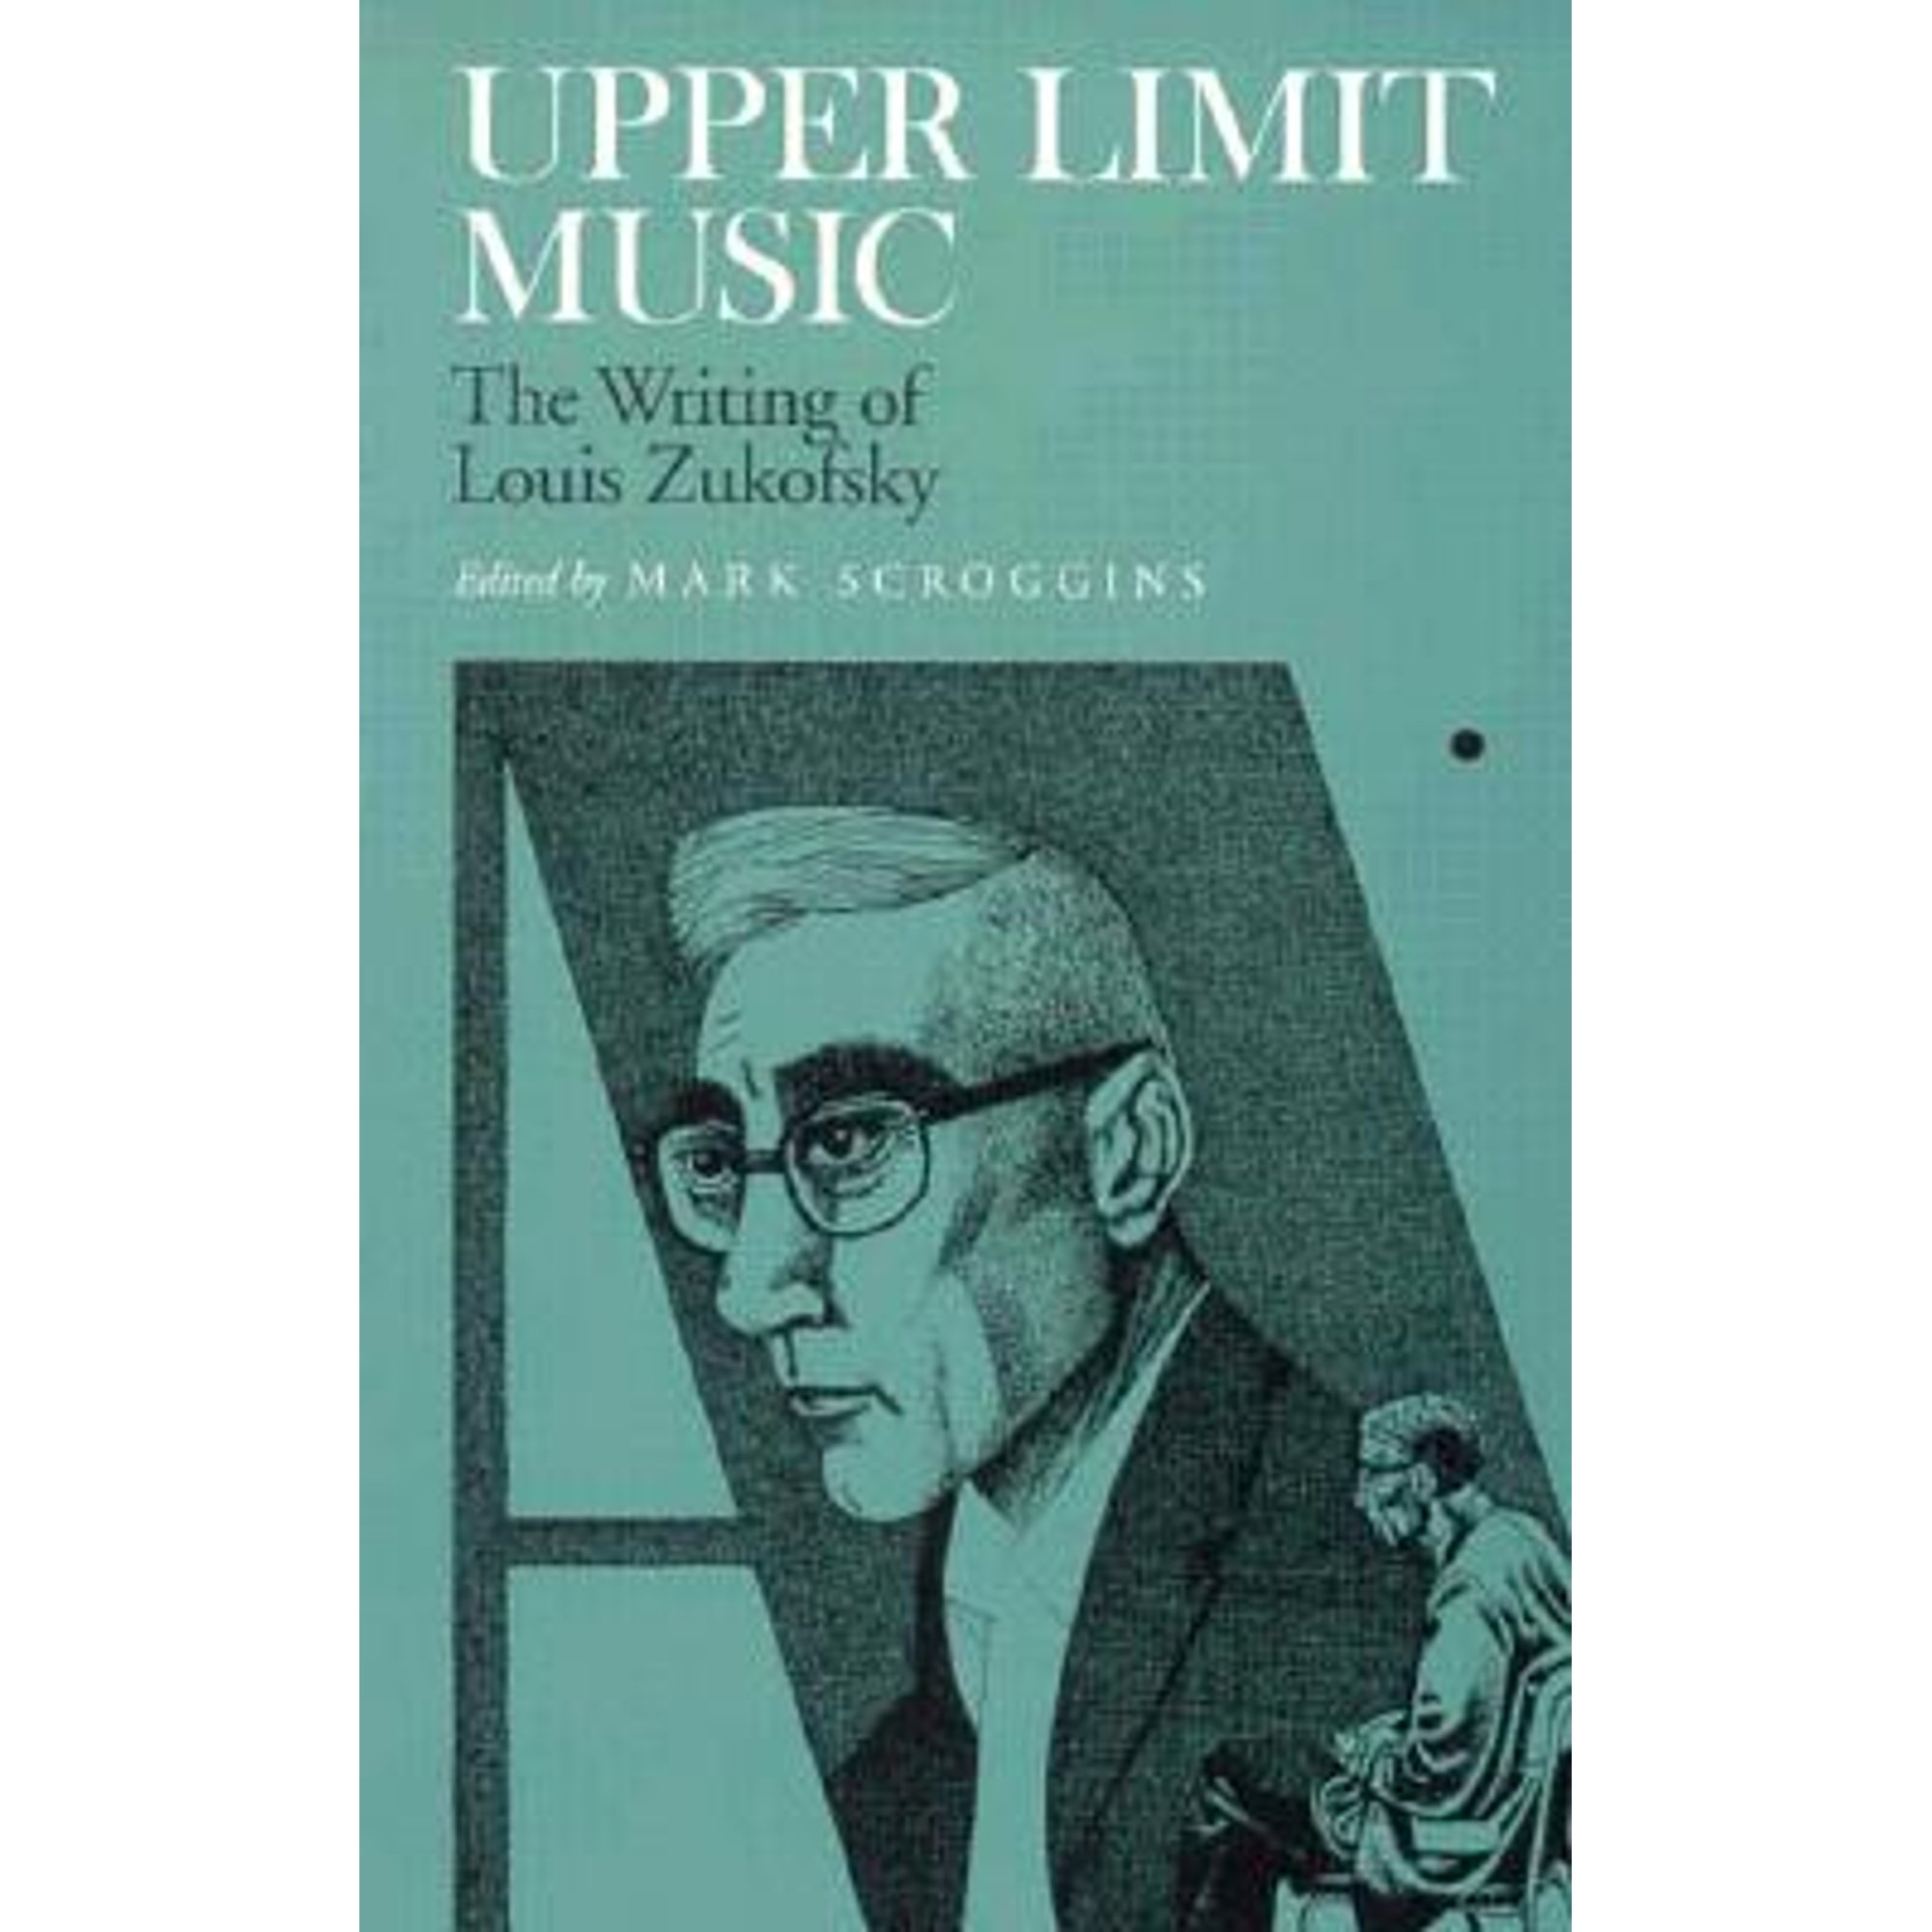 Upper limit music the writing of louis zukofsky pre